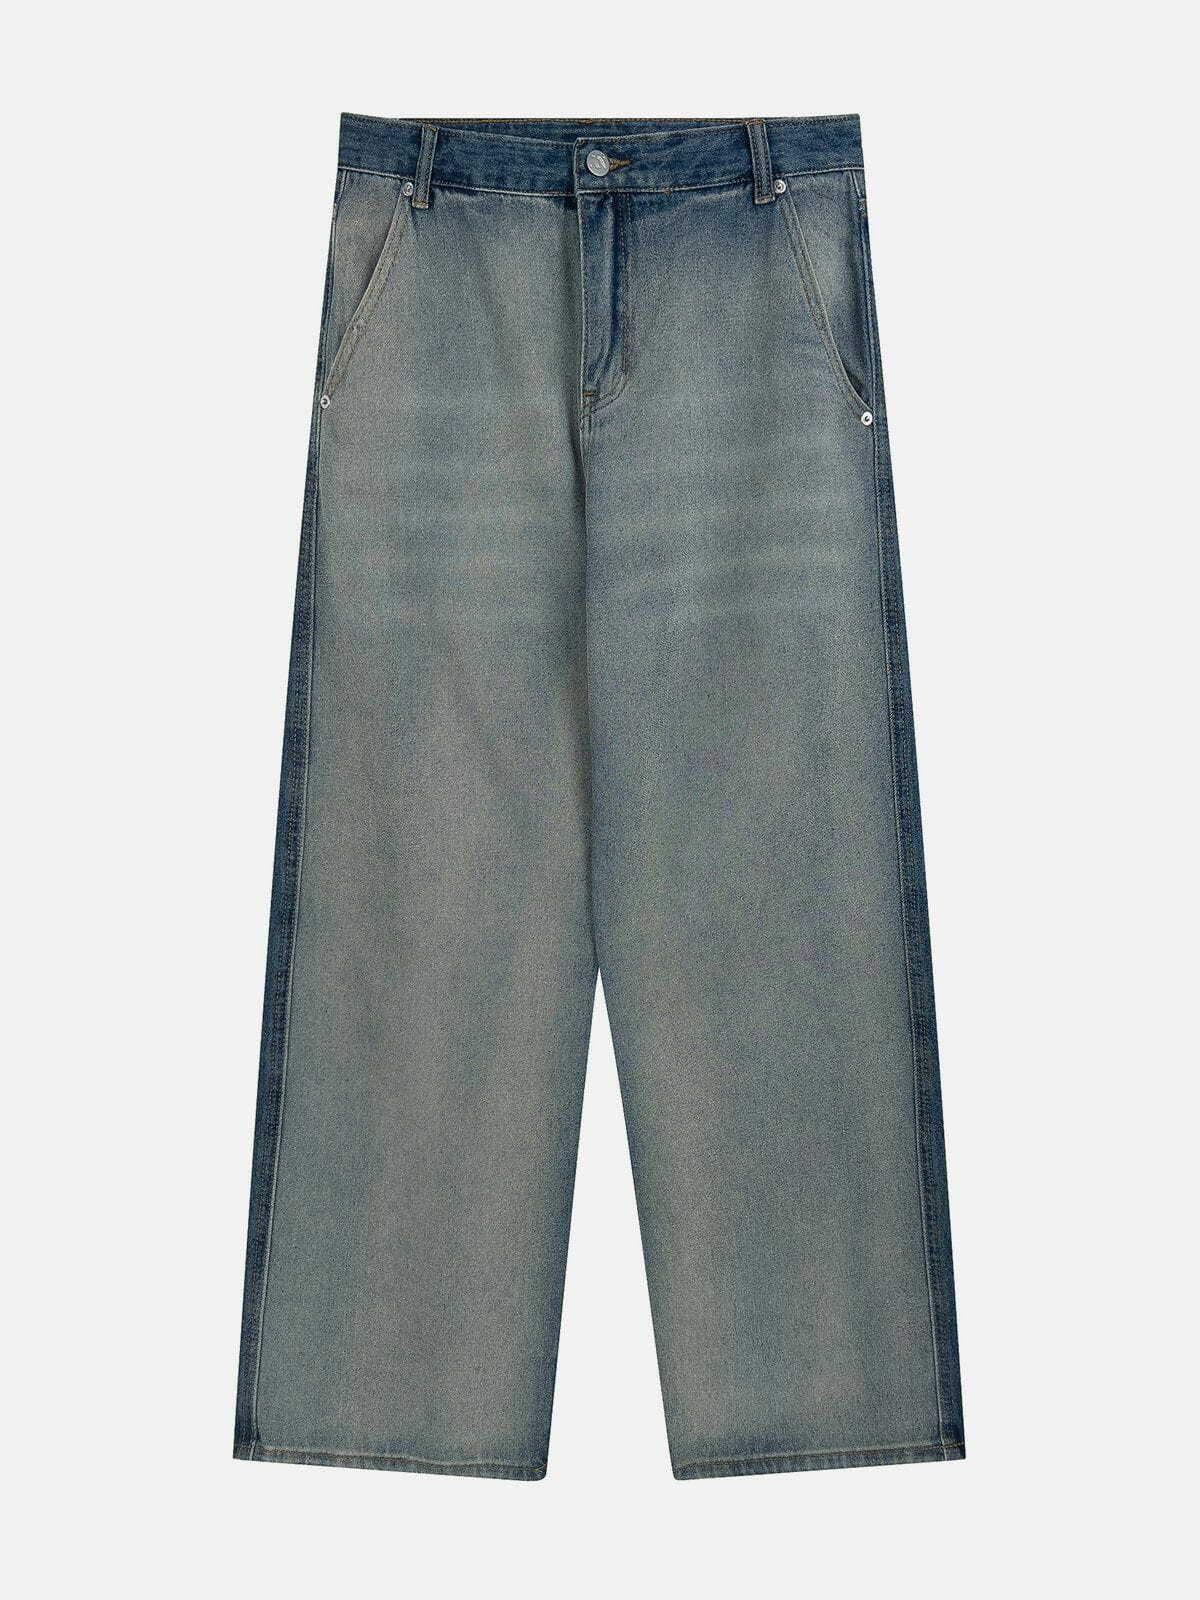 contrast waterwashed jeans edgy & retro streetwear 8731